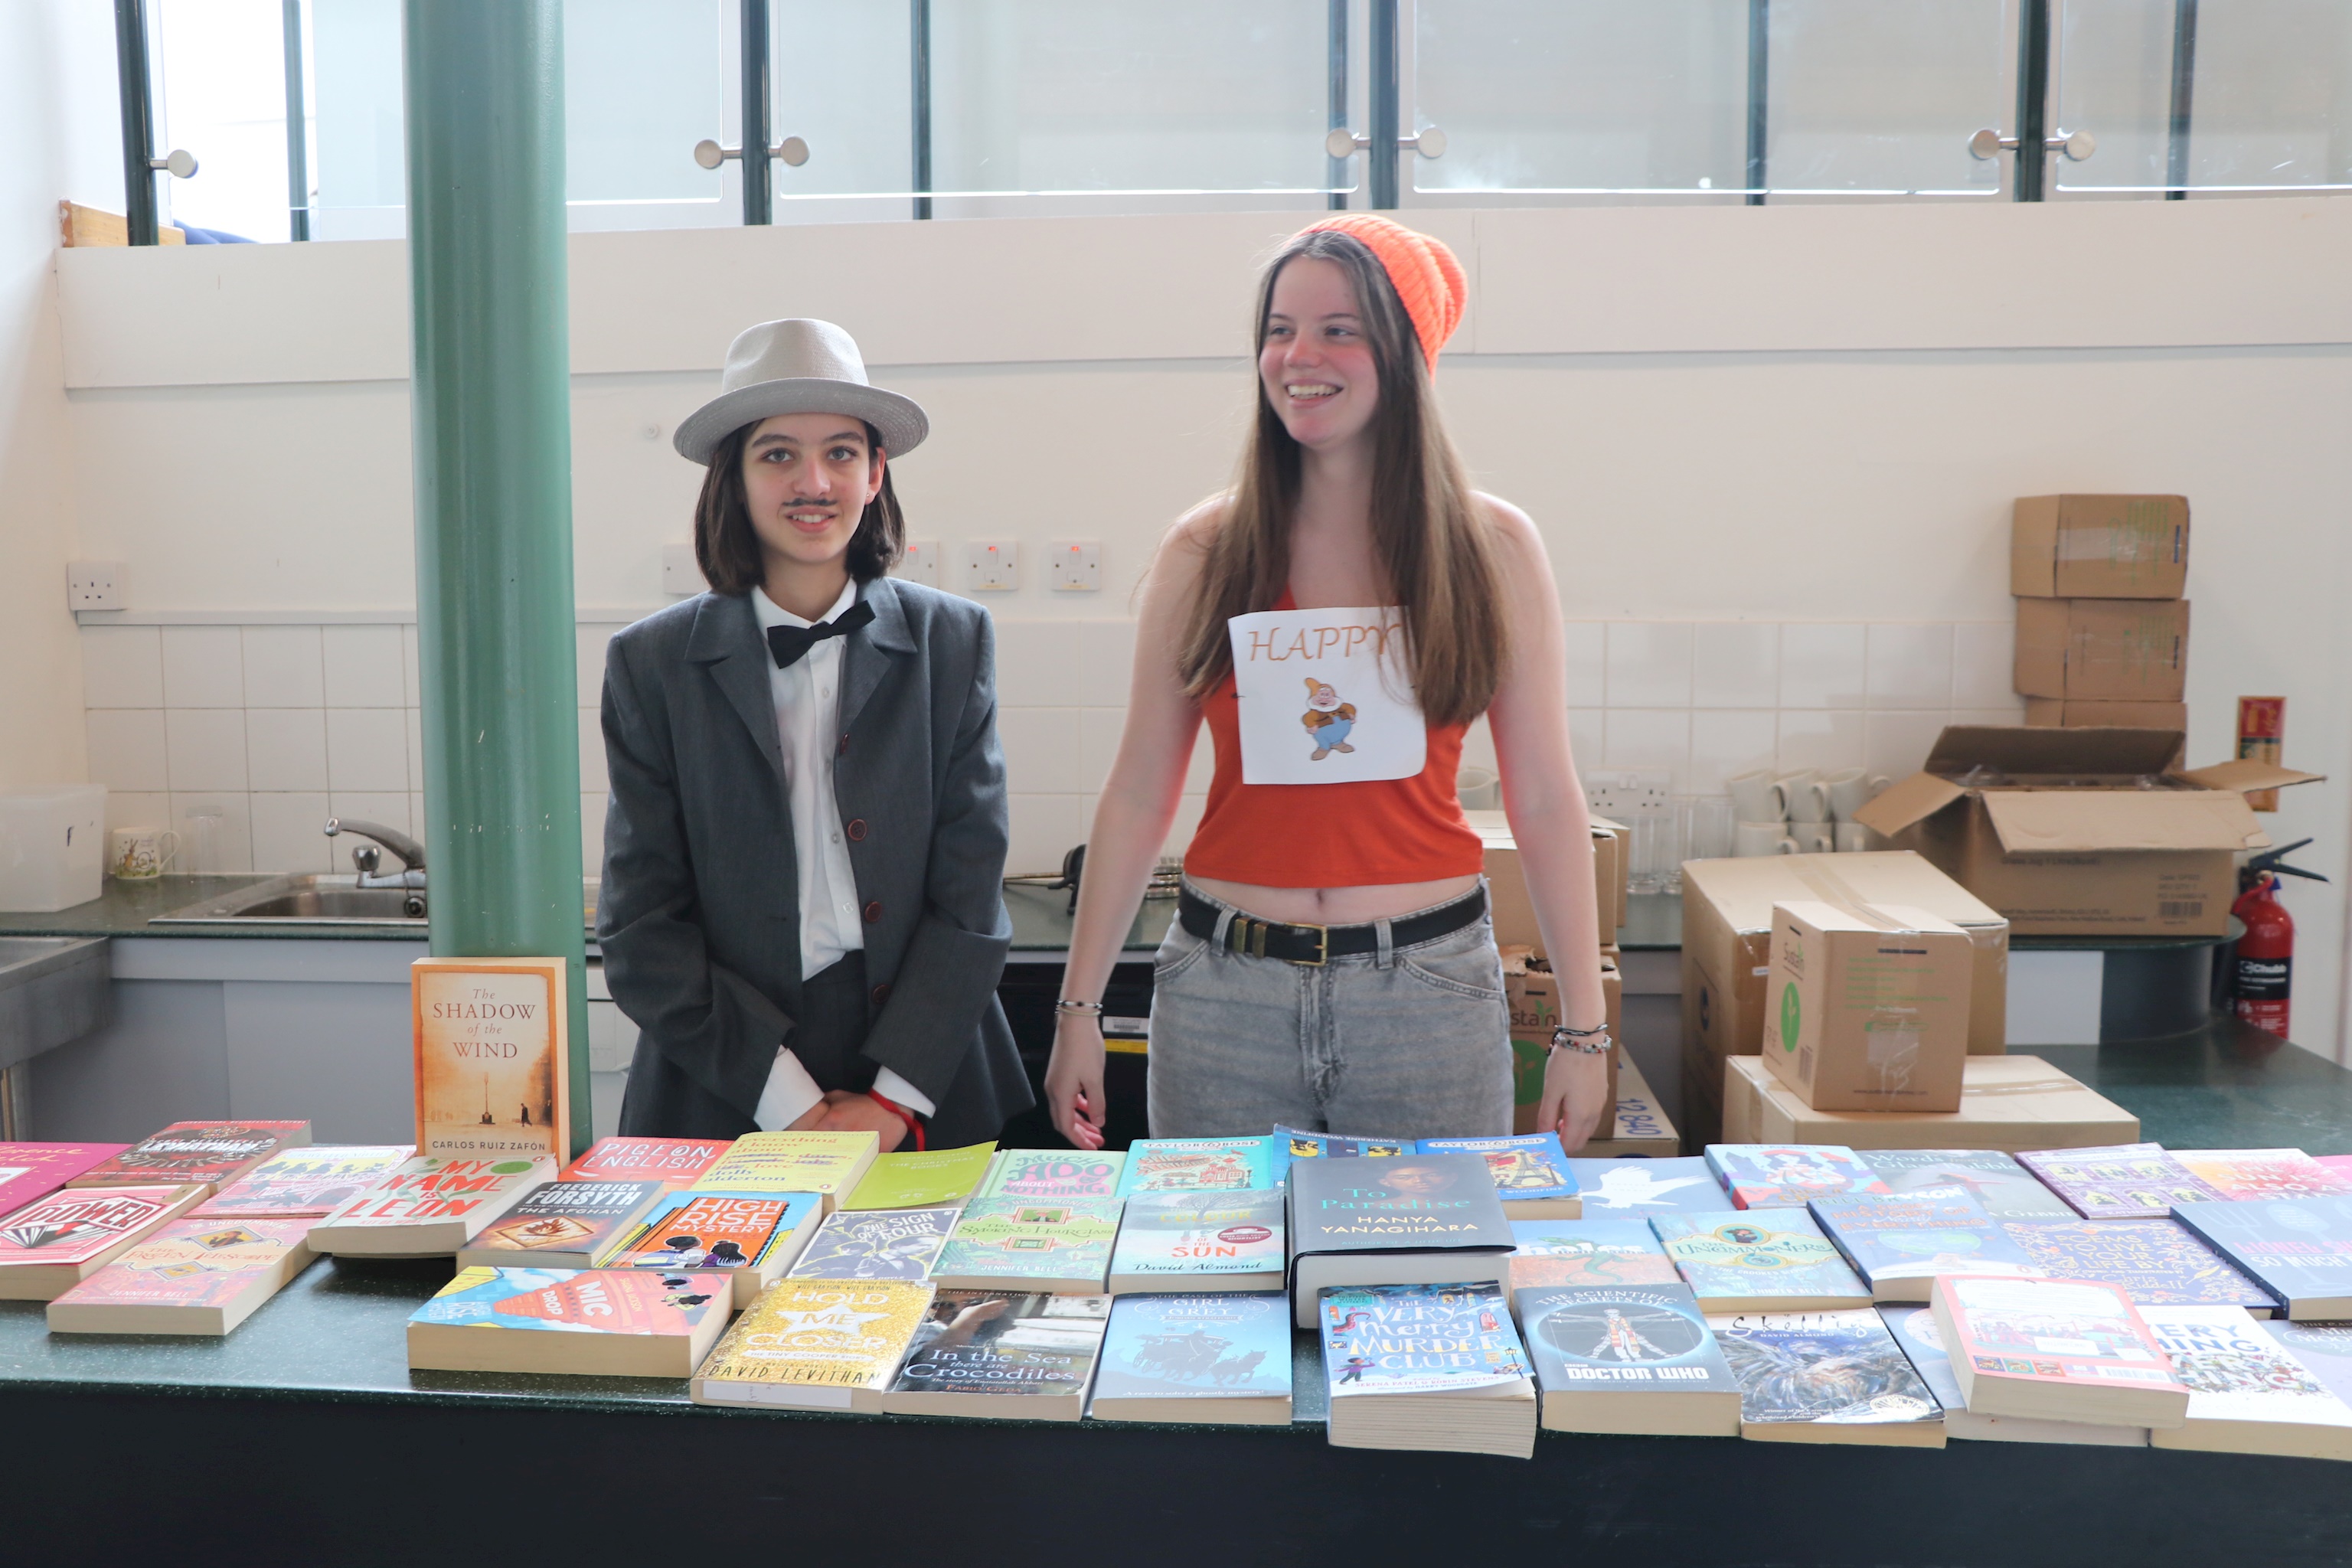 Two sixth form students standing behind a book stall, running the World Book Day book swap